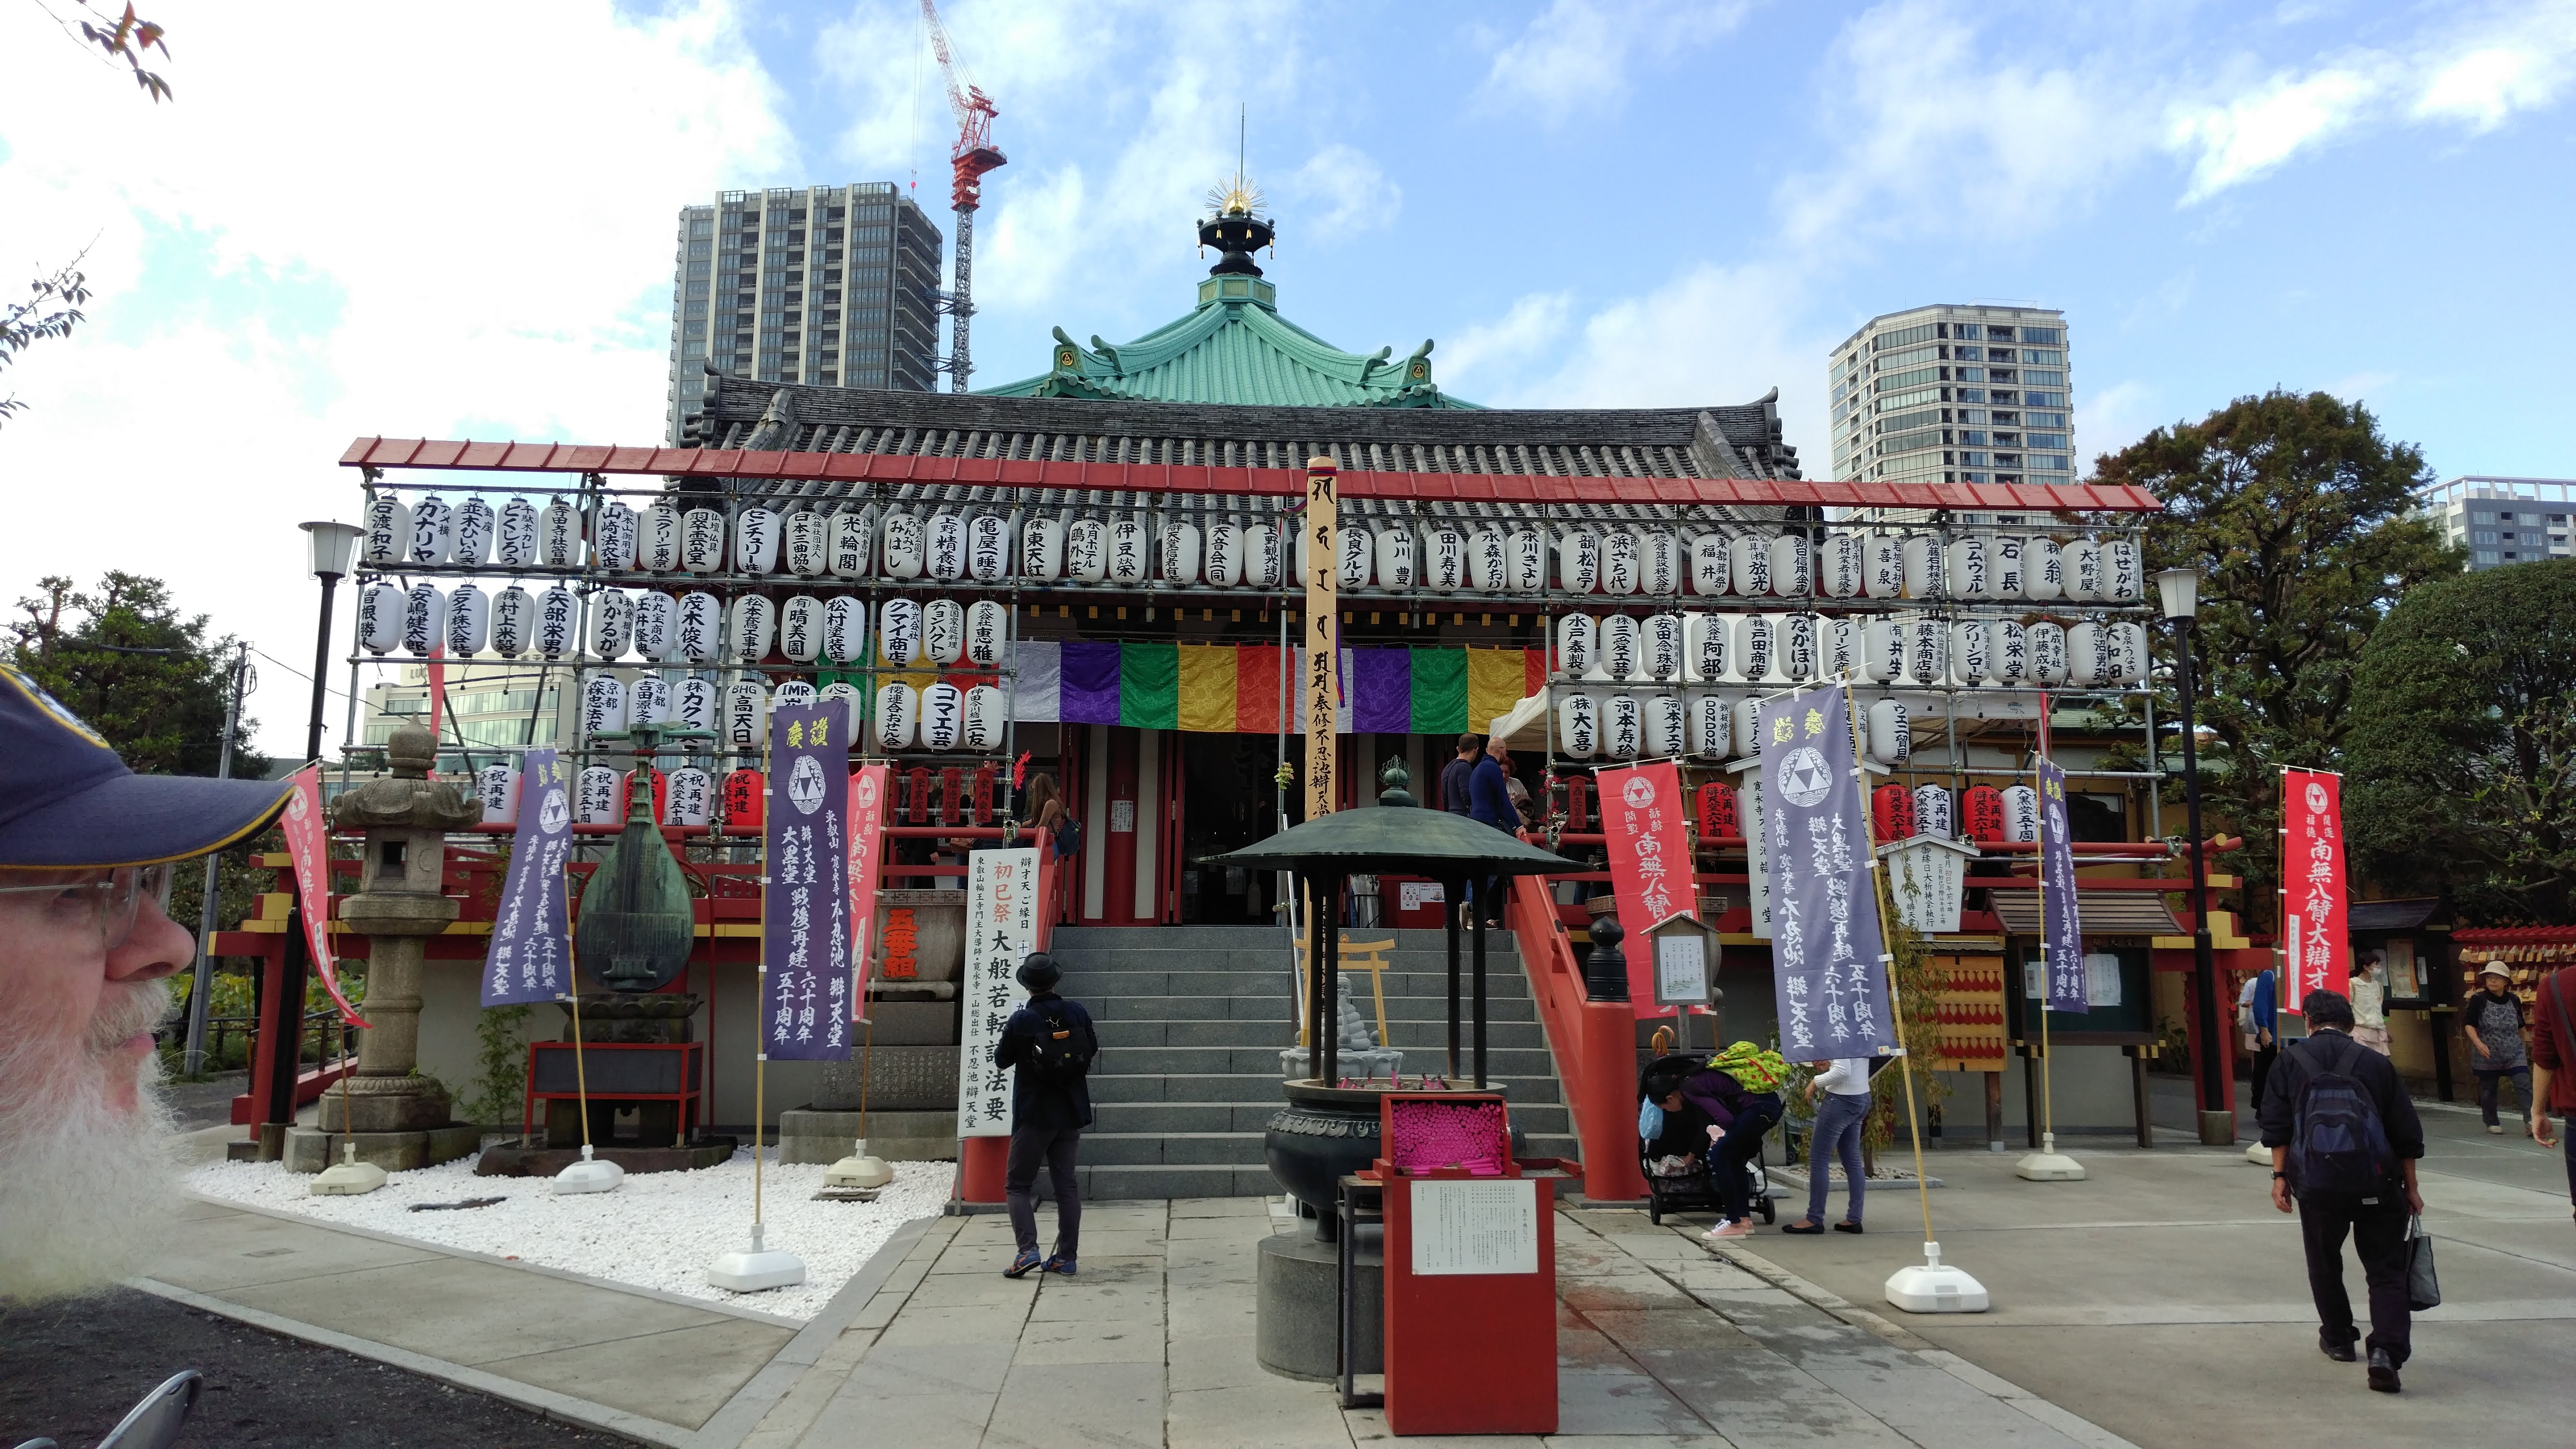 shrine decorated with lanterns and banners